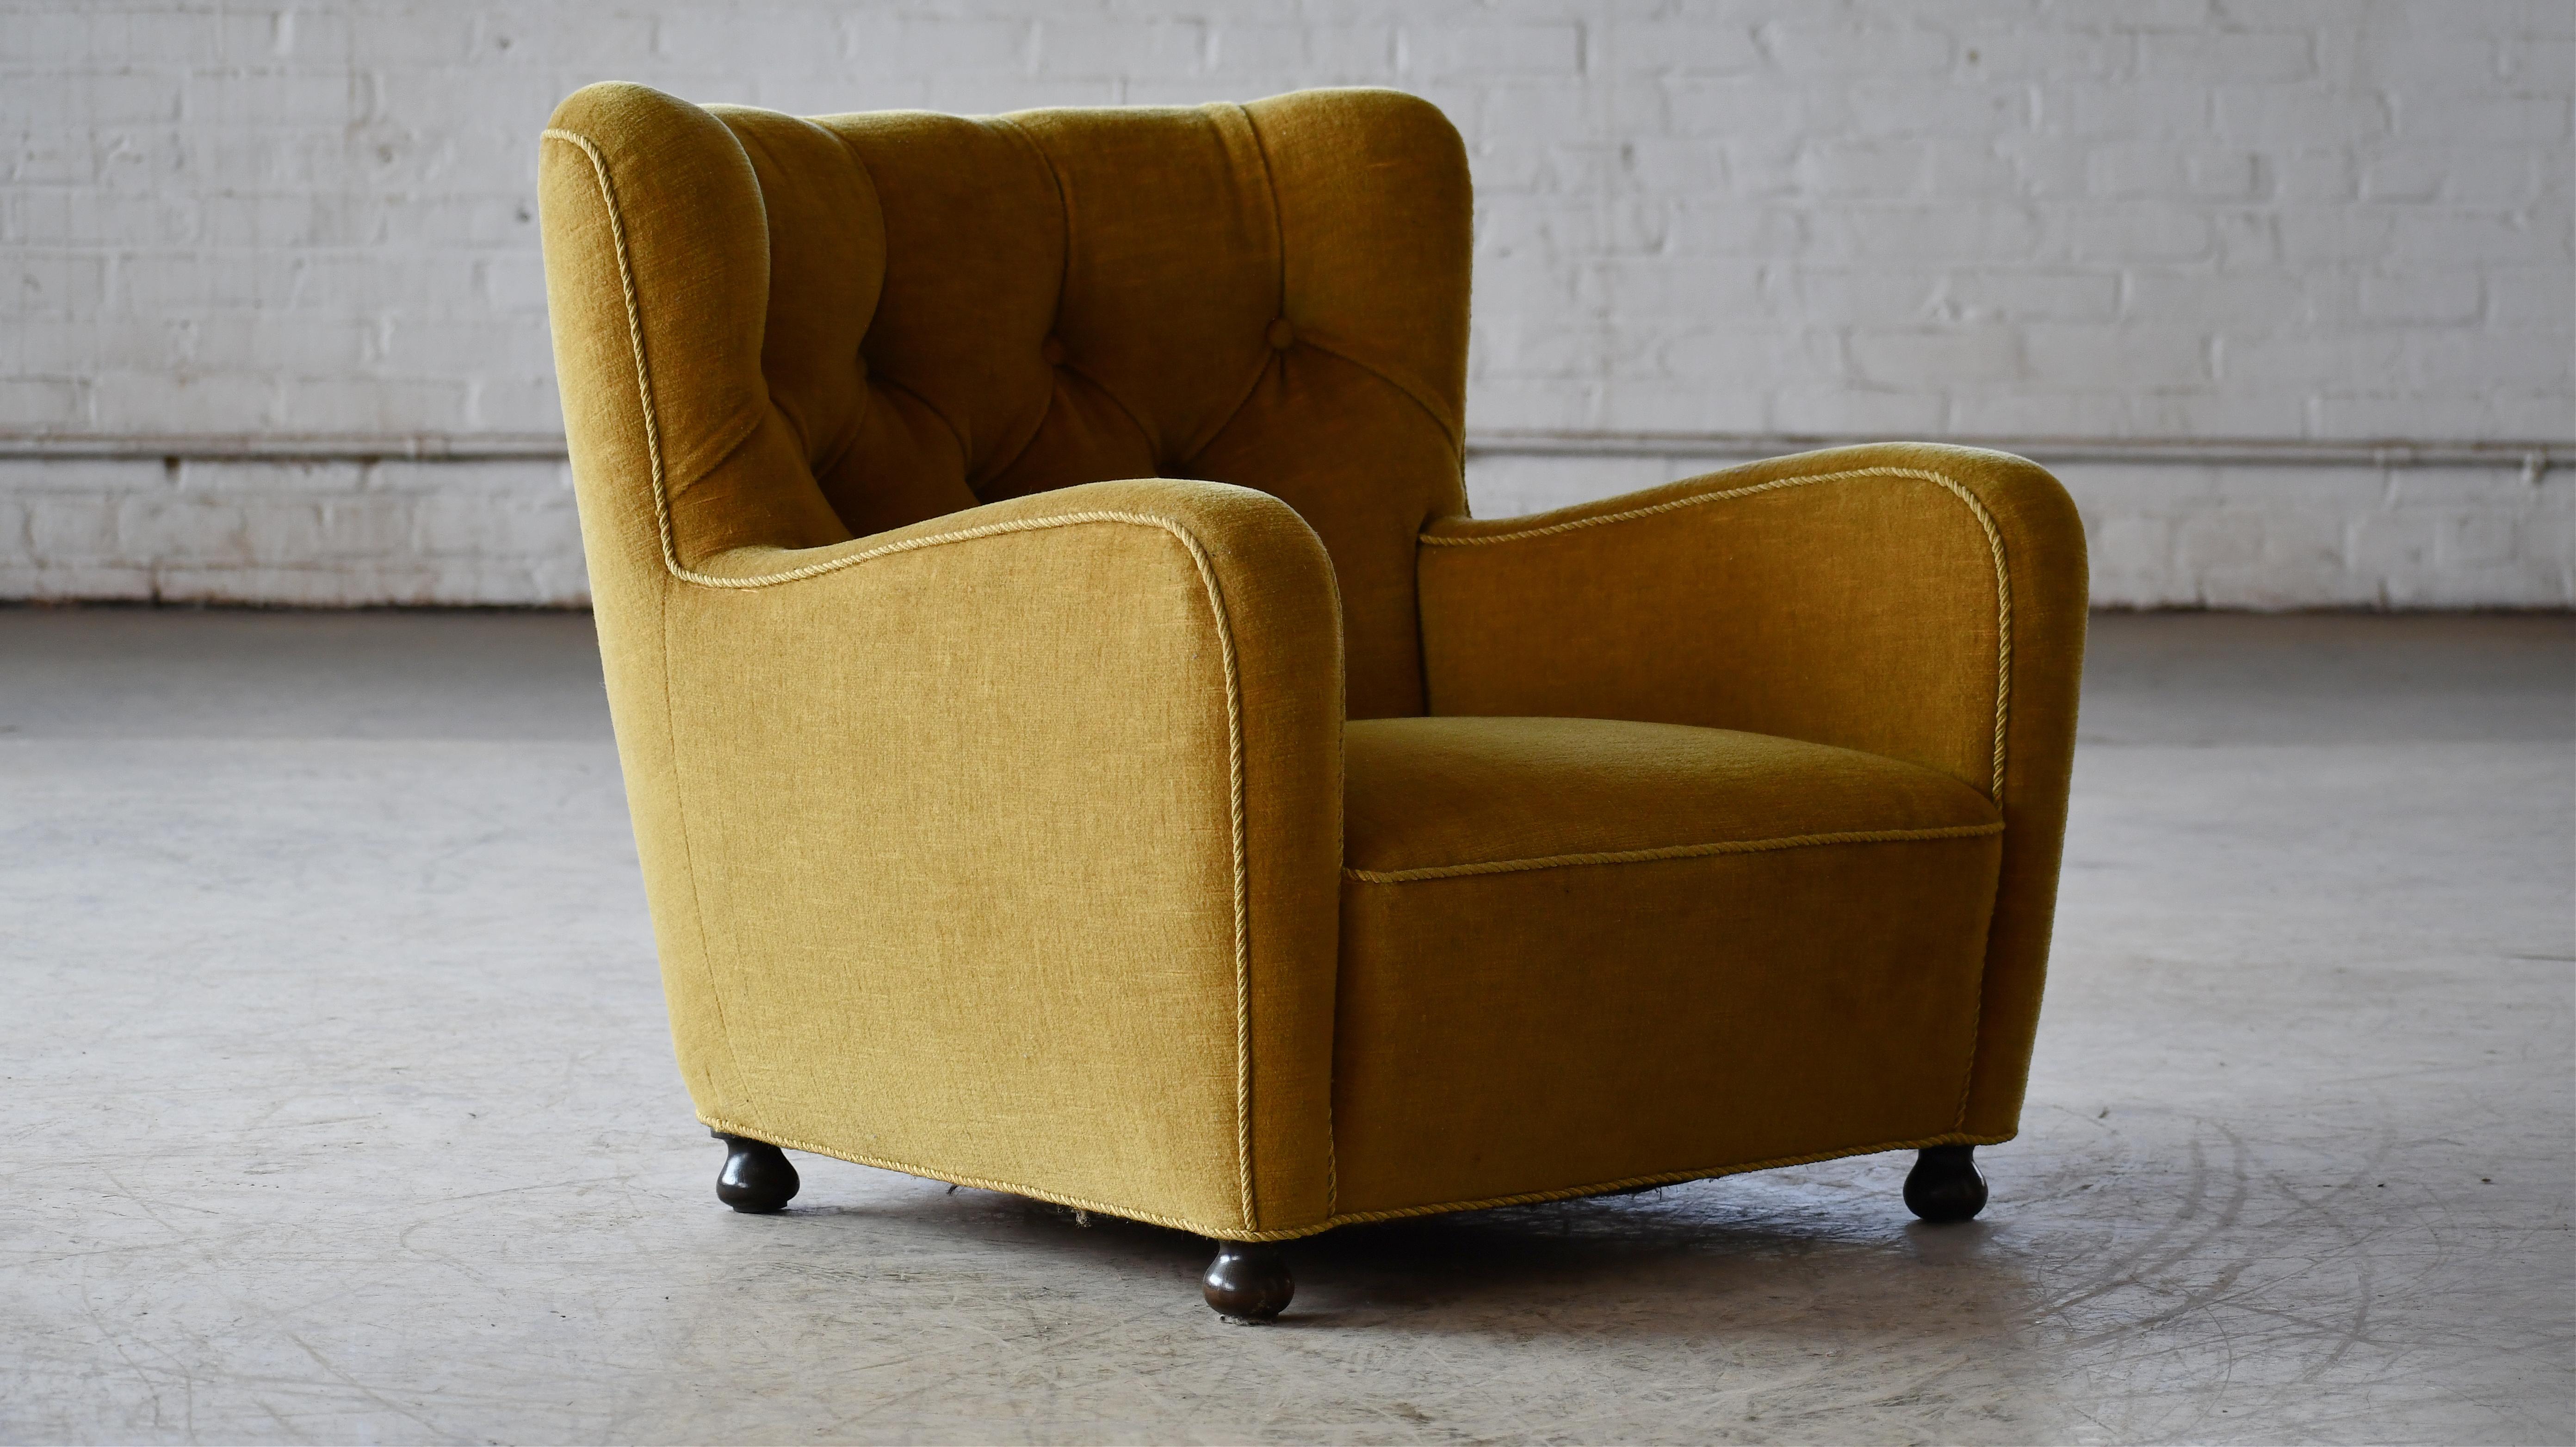 1930-40s Danish Art Deco or Early Midcentury Lounge Chair in Golden Mohair 2